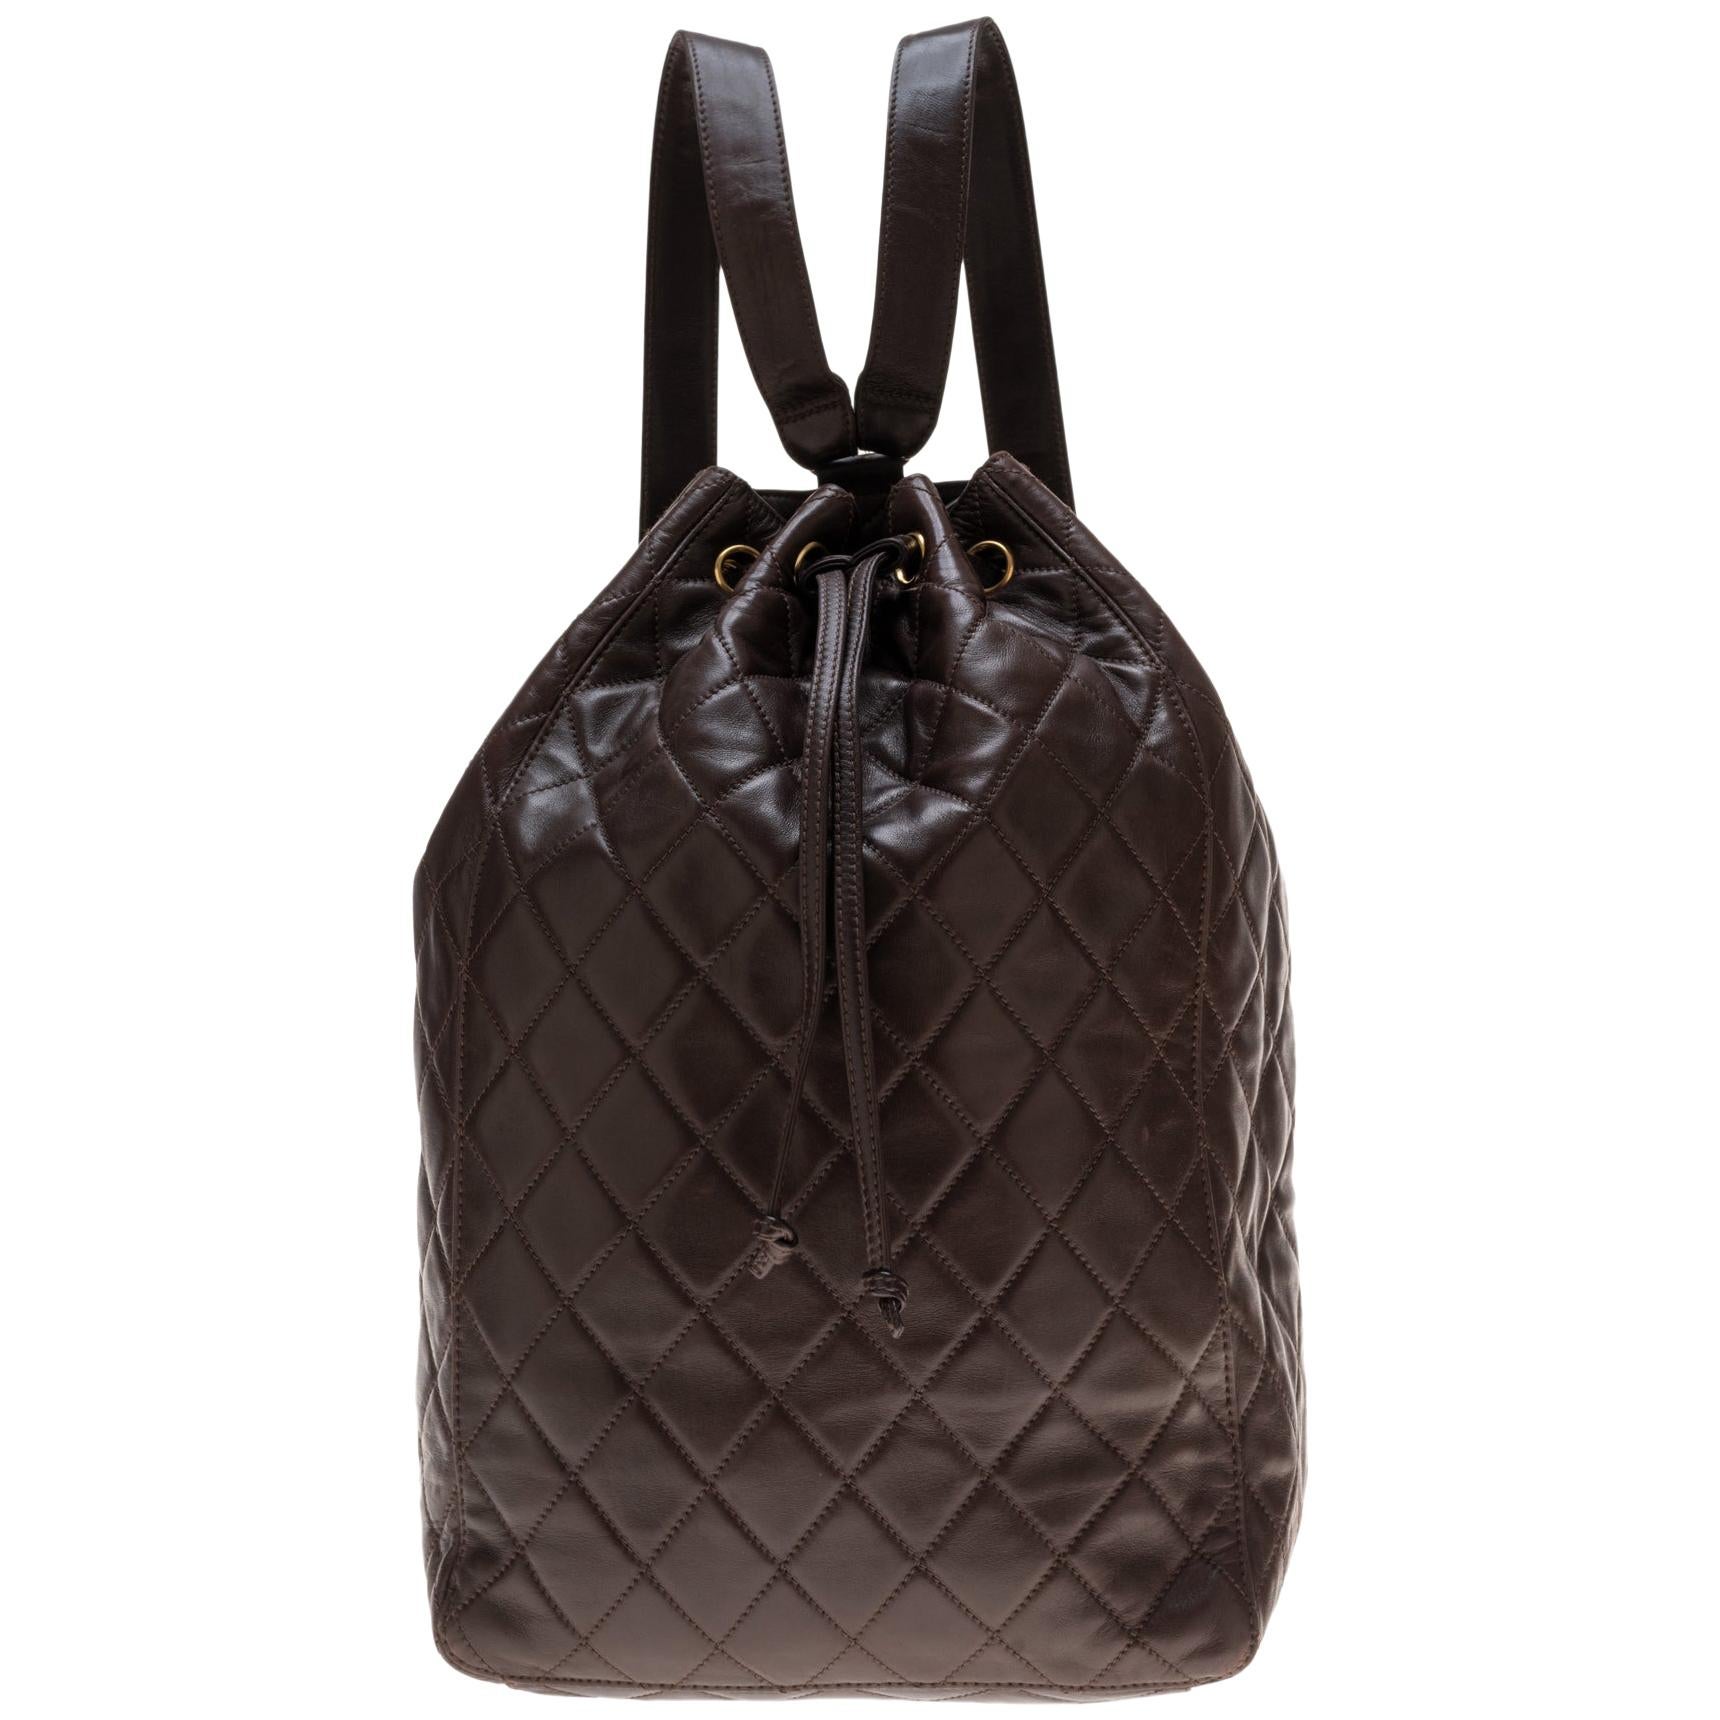 Beautiful Chanel Backpack in quilted brown lambskin !